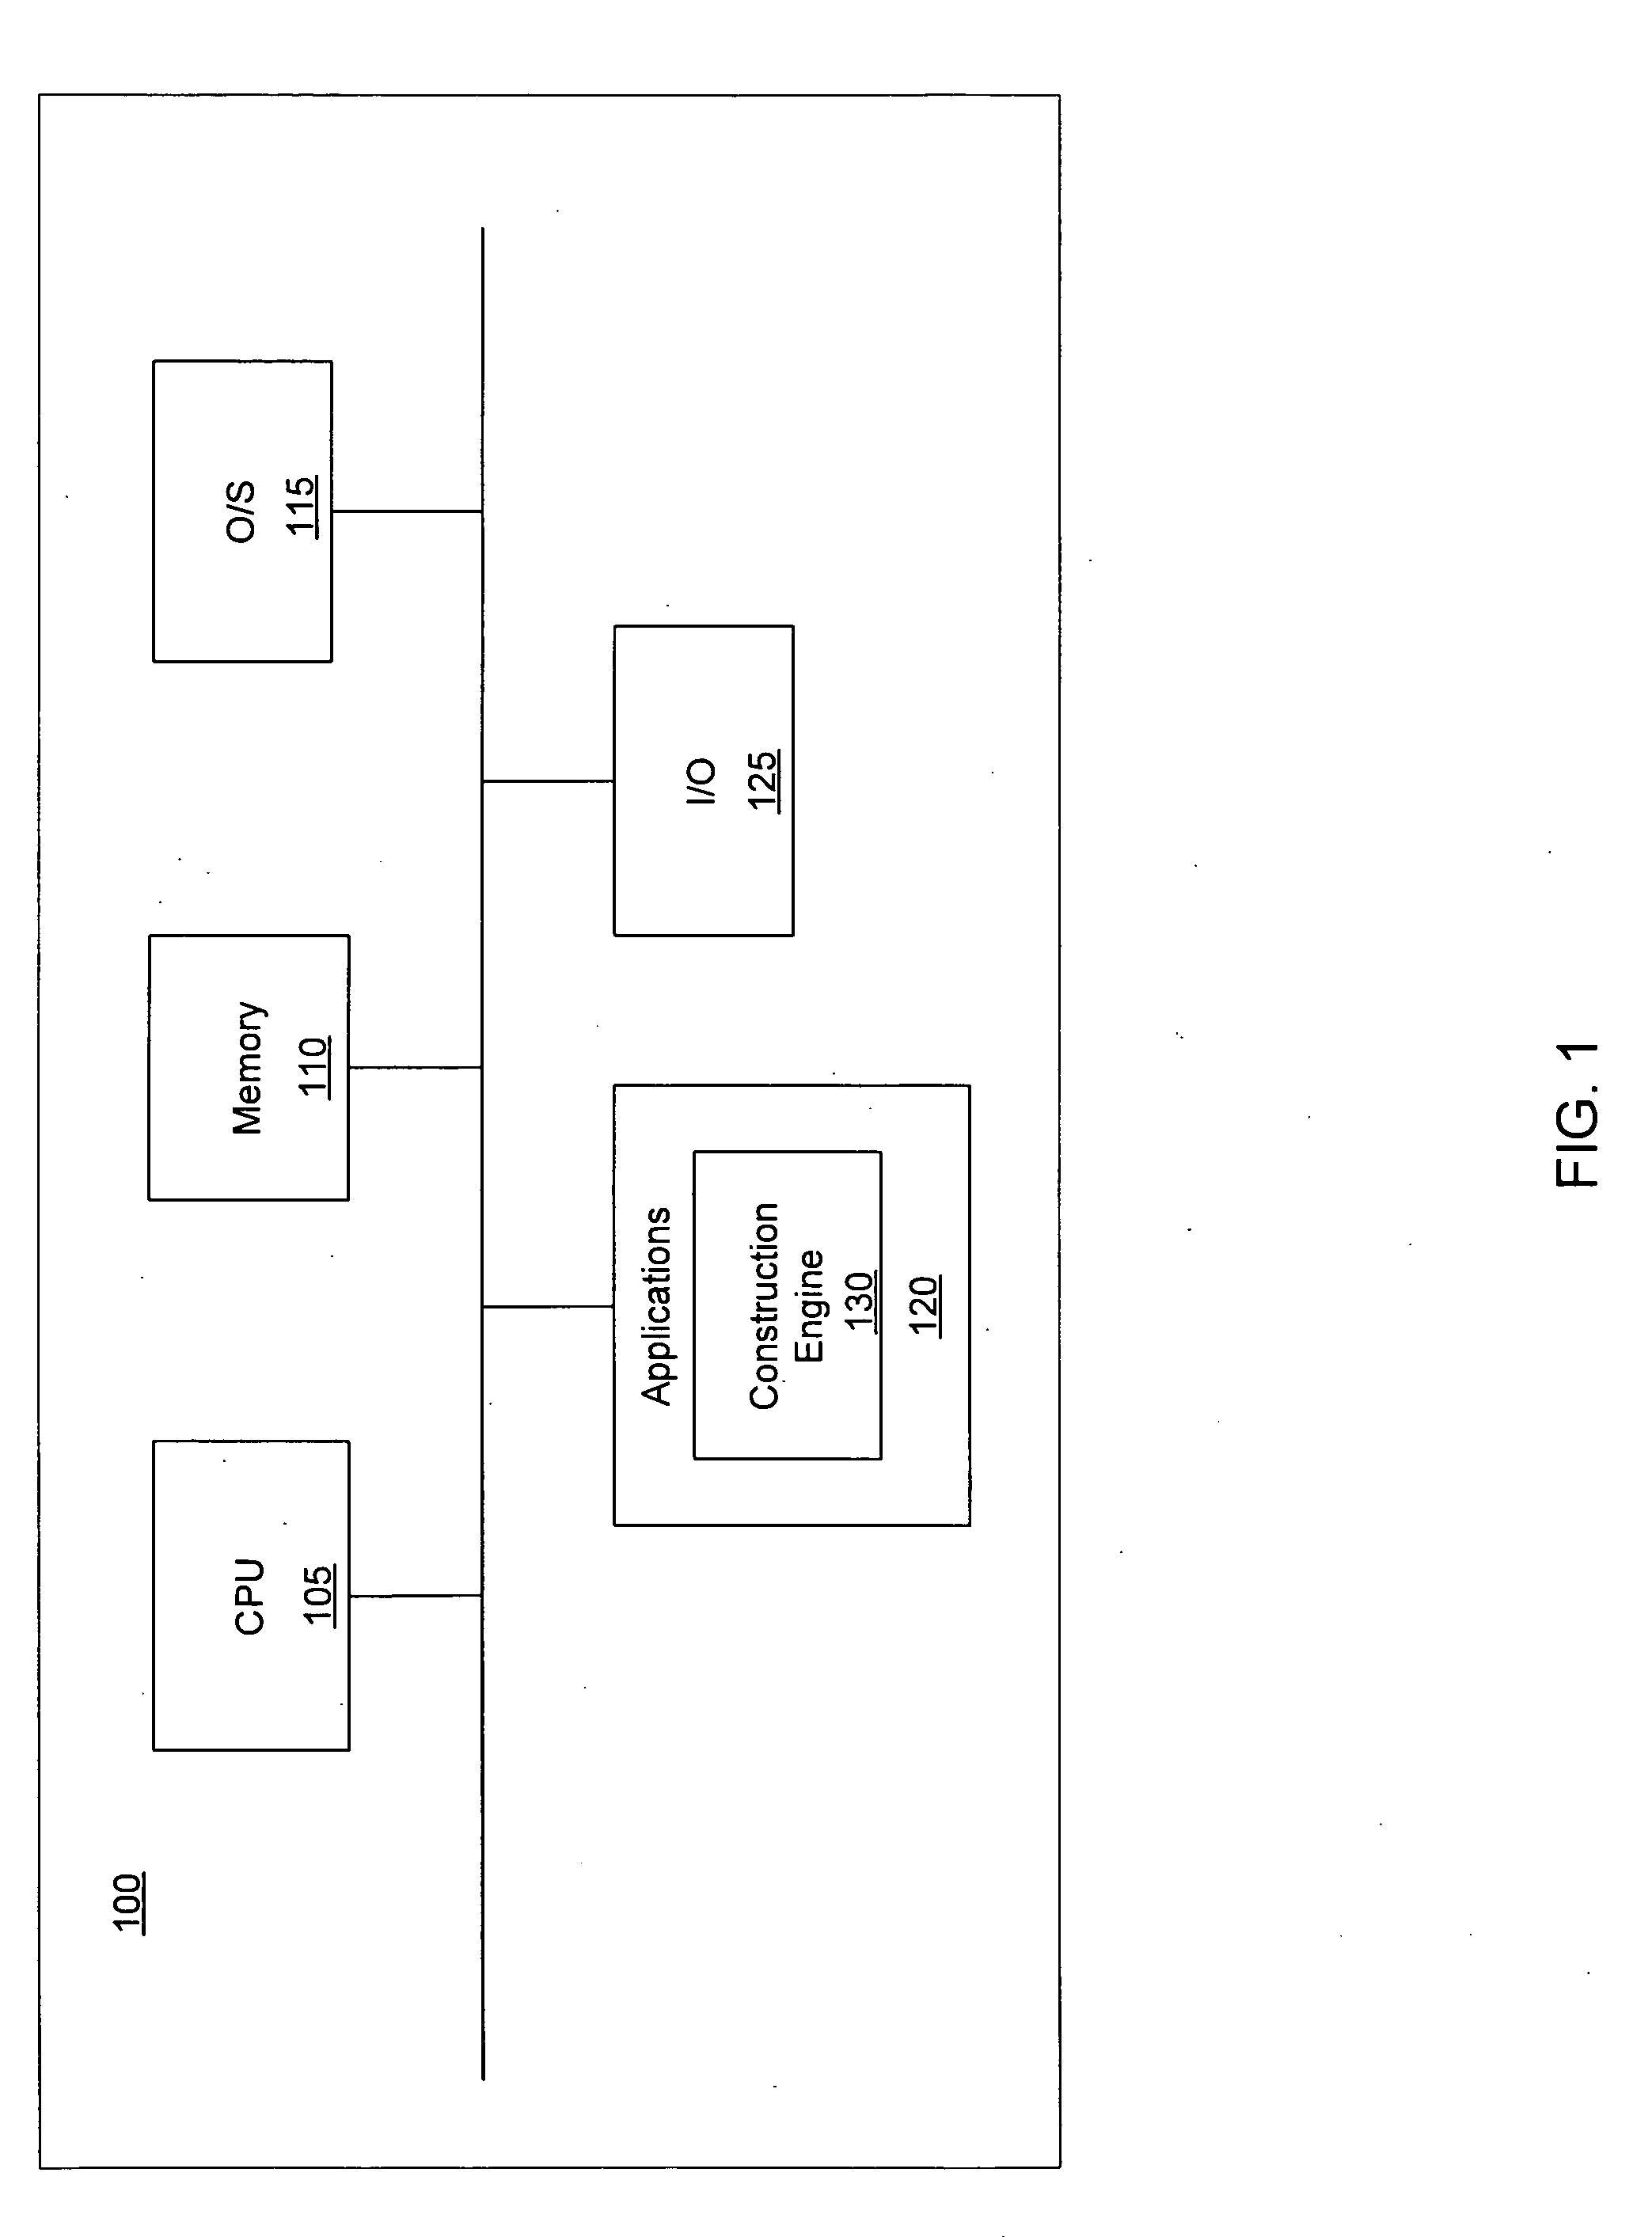 Construction project management system and method